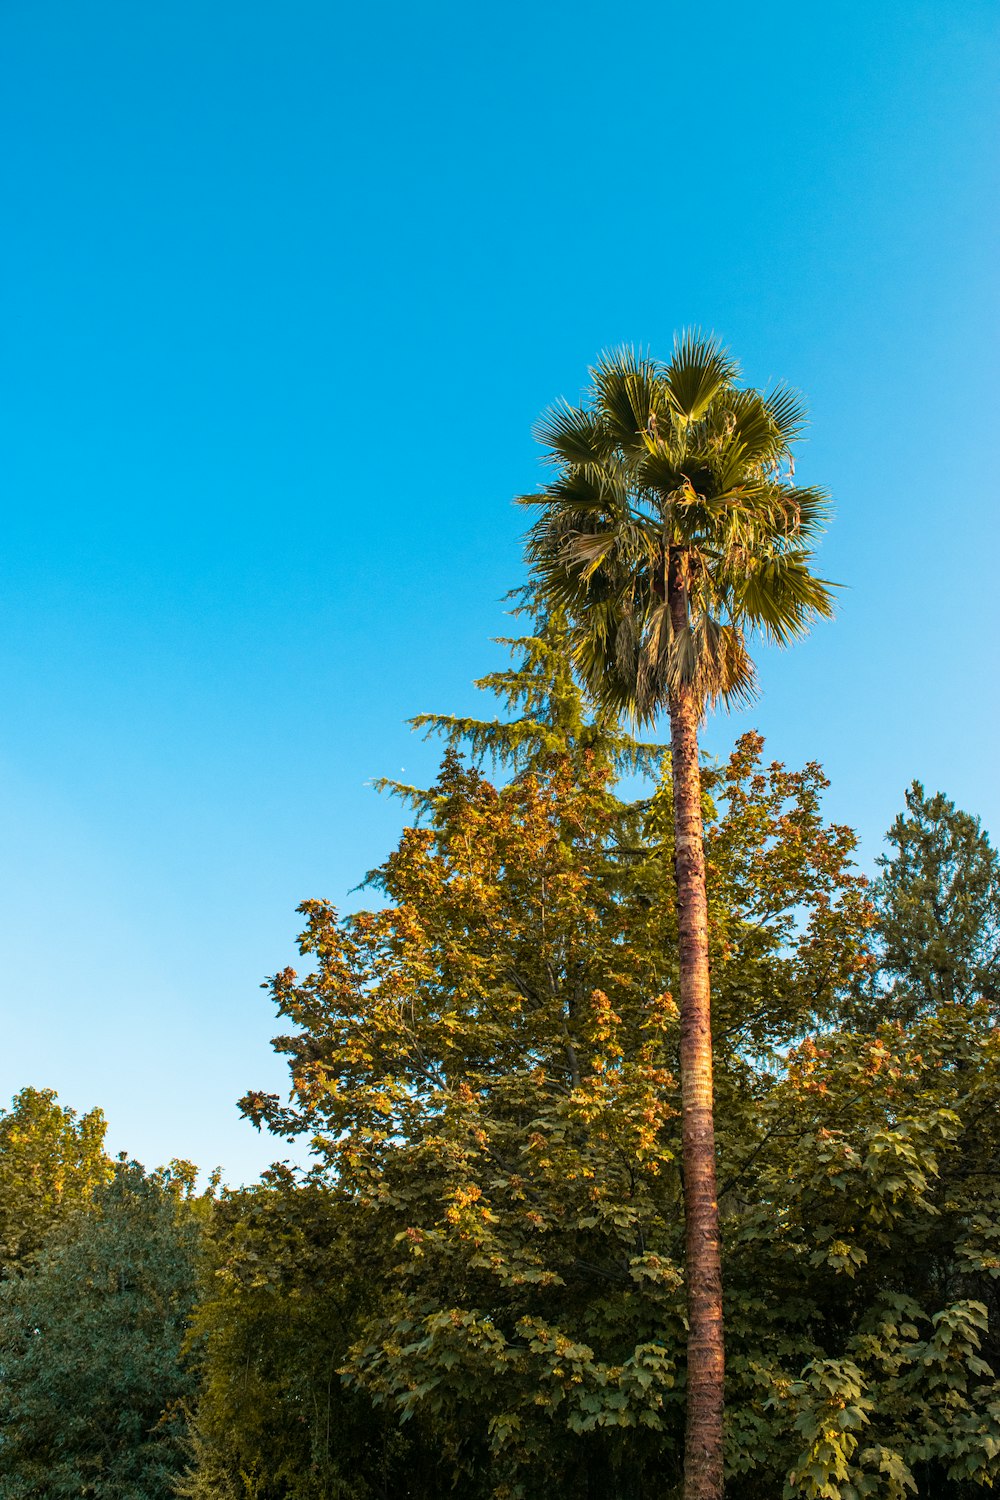 a tall palm tree sitting next to a lush green forest